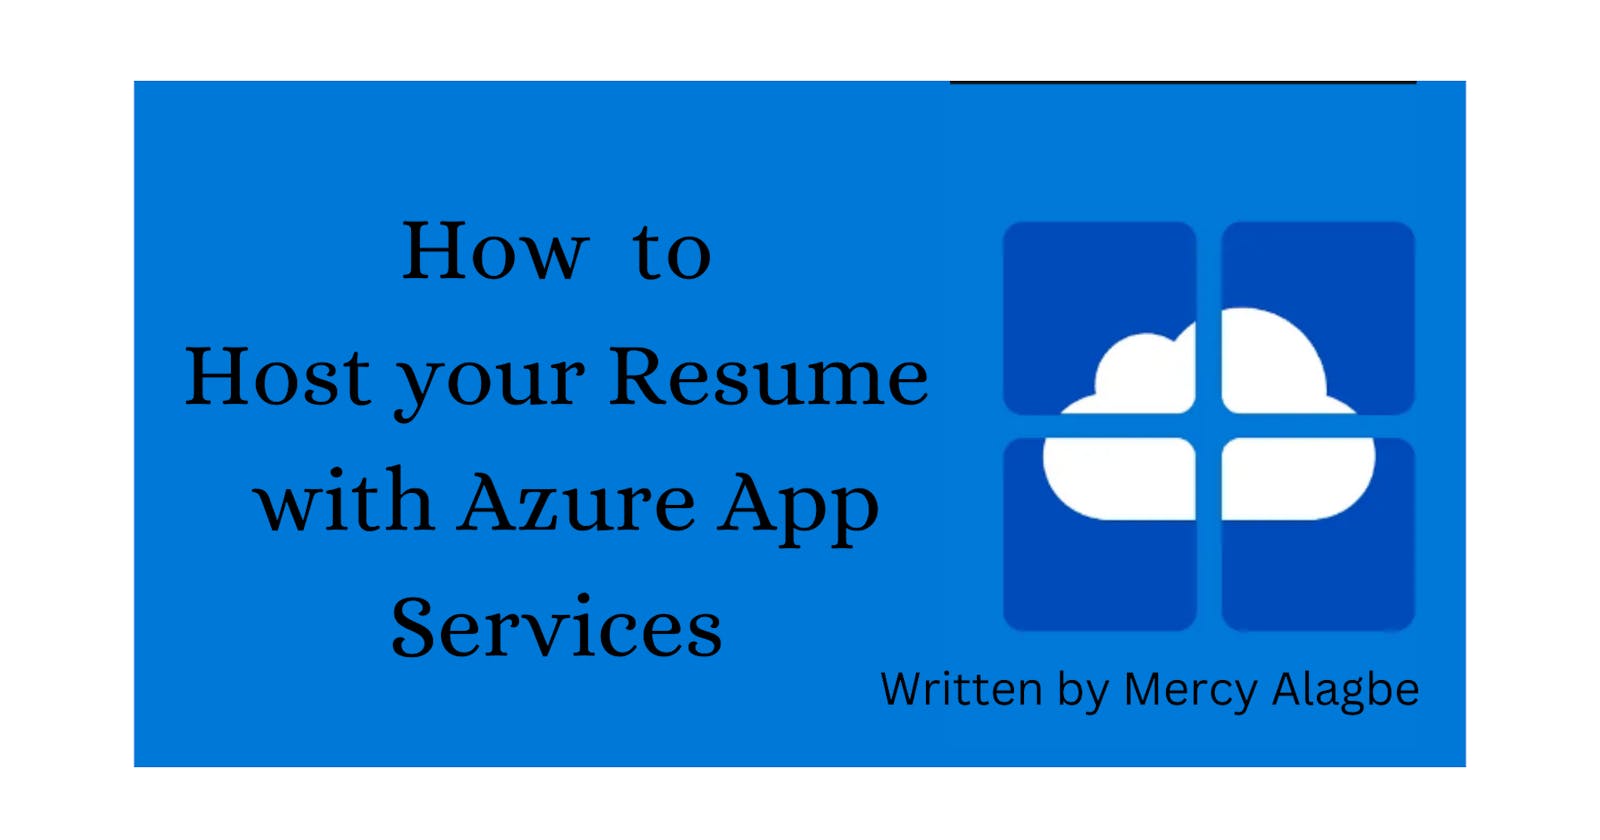 Hosting your Resume with Azure App Services